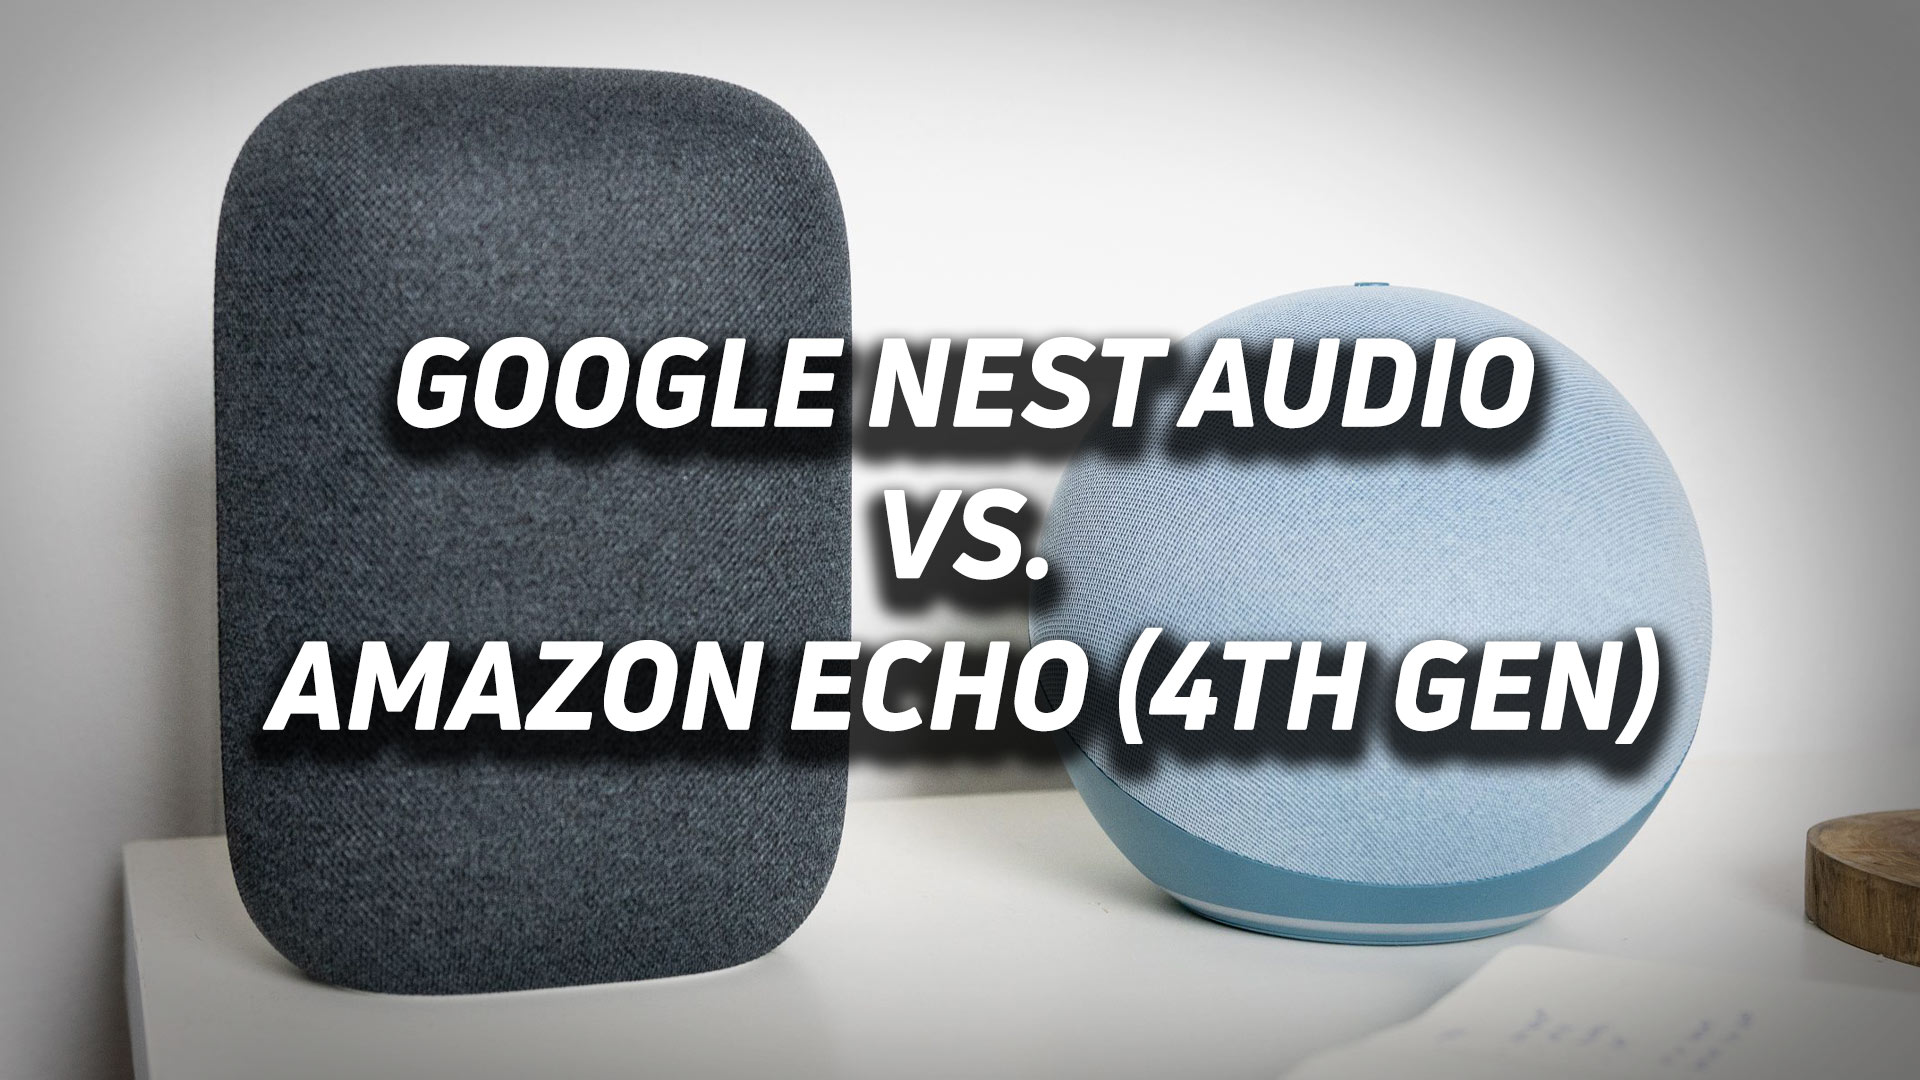 Amazon Echo 4th gen next to Google Nest Audio and a notebook on a white desk with versus text overlaid atop the image.